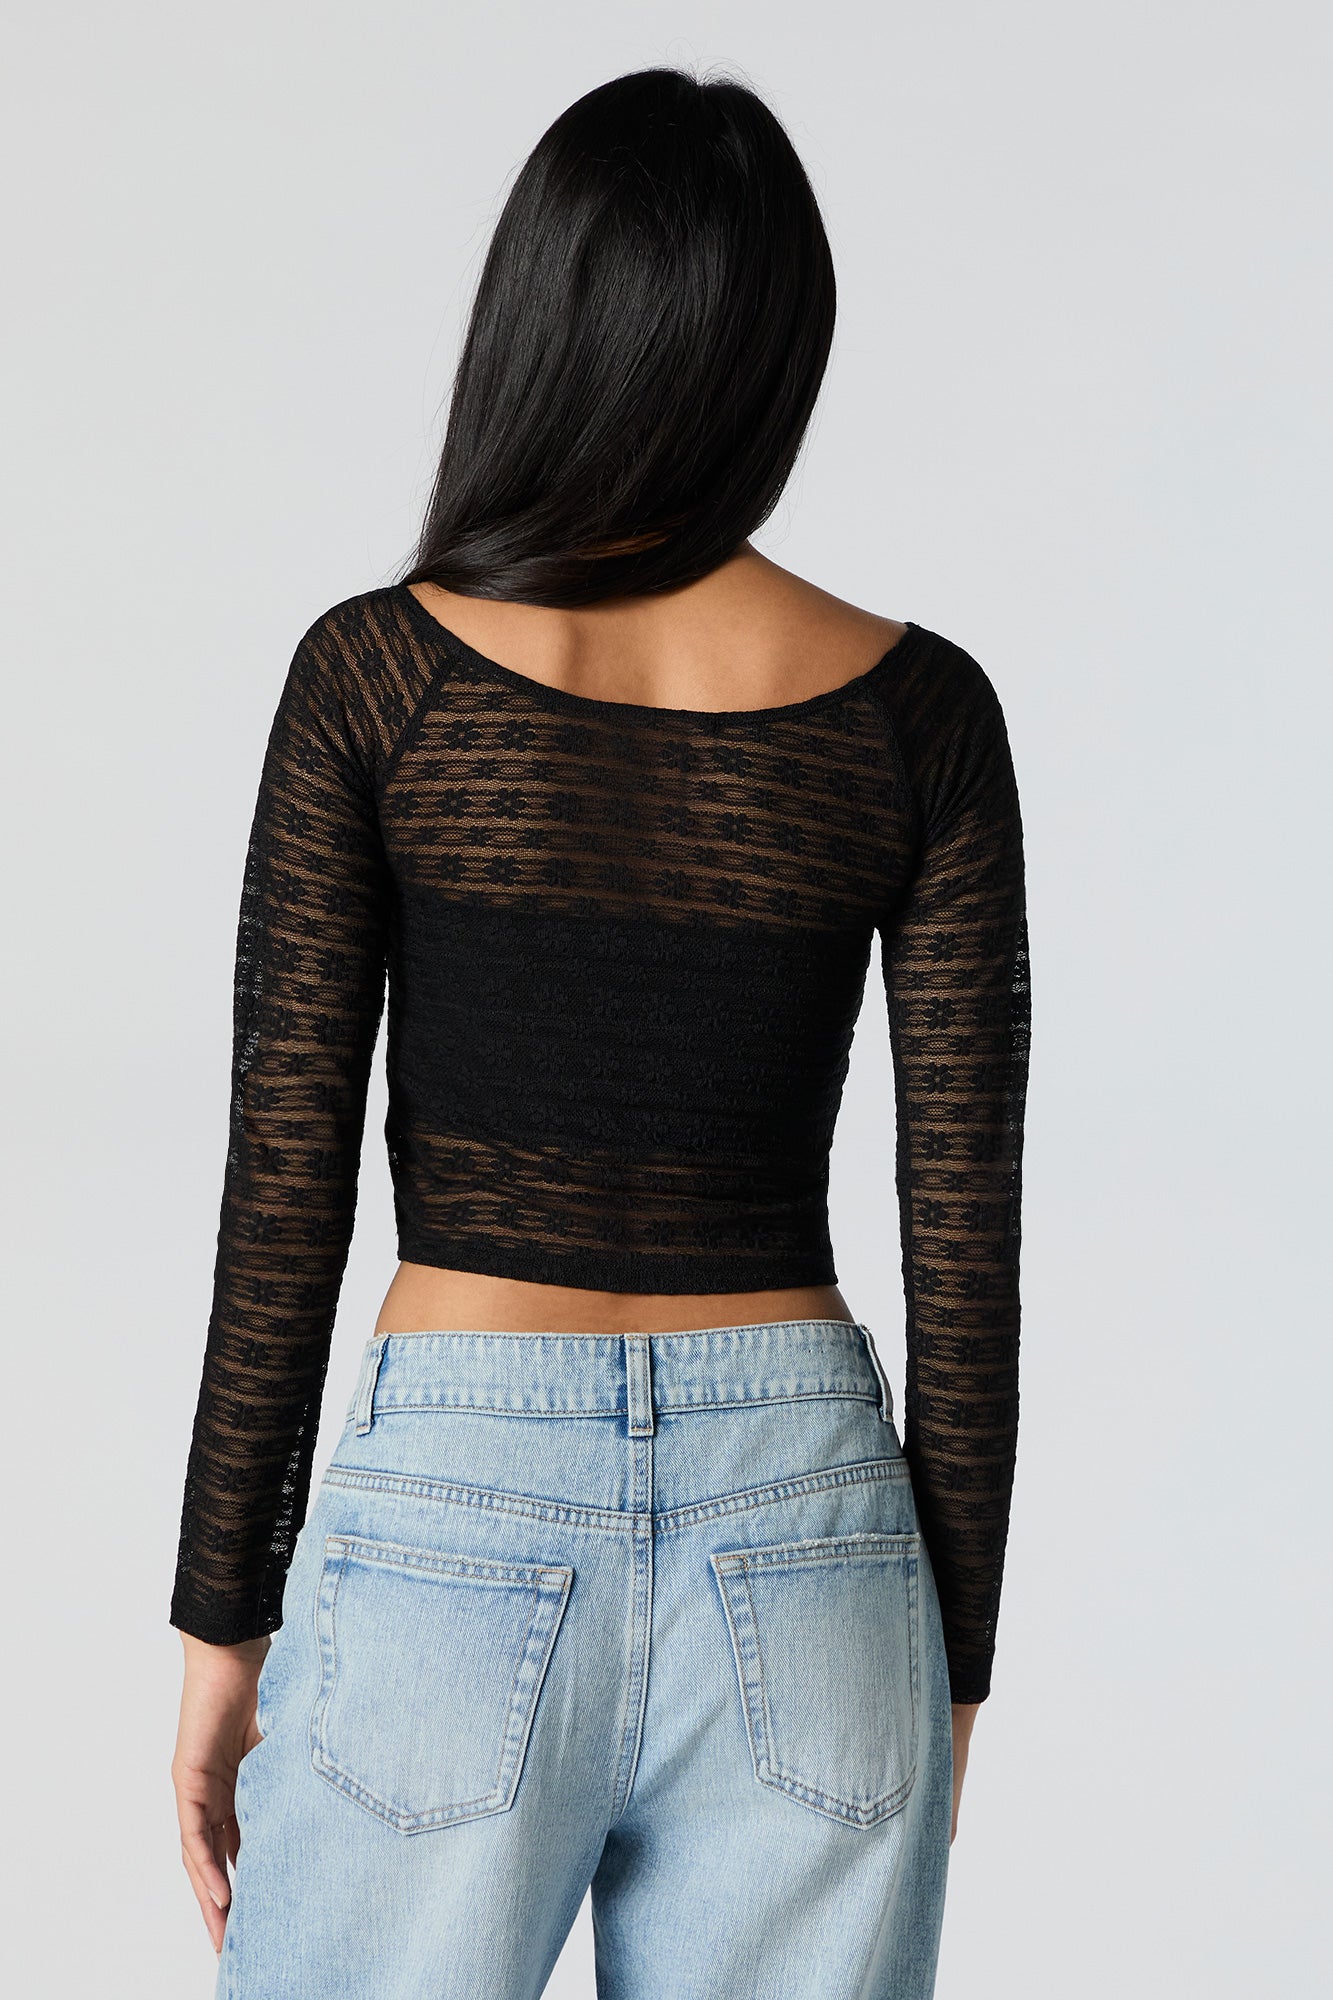 Floral Lace Long Sleeve Crop Top